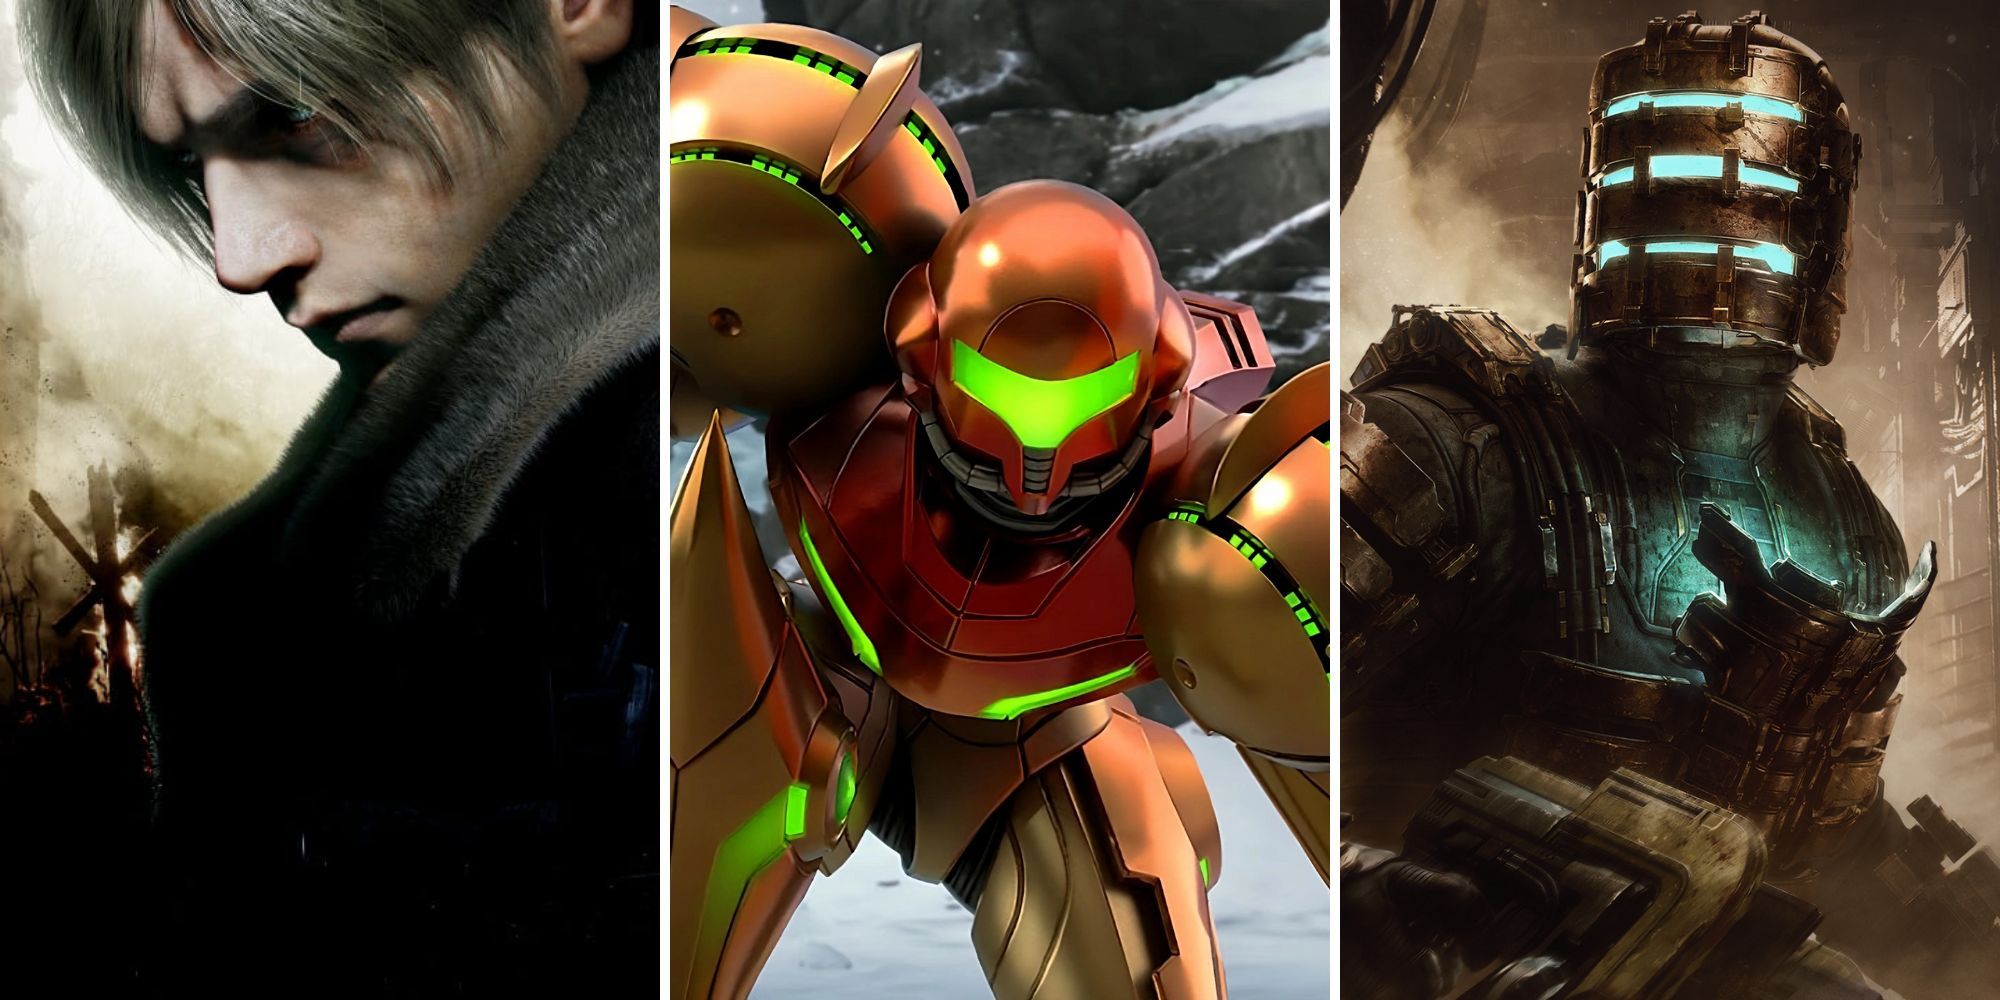 Metacritic's 10 best-rated 2023 games are all remakes/remasters